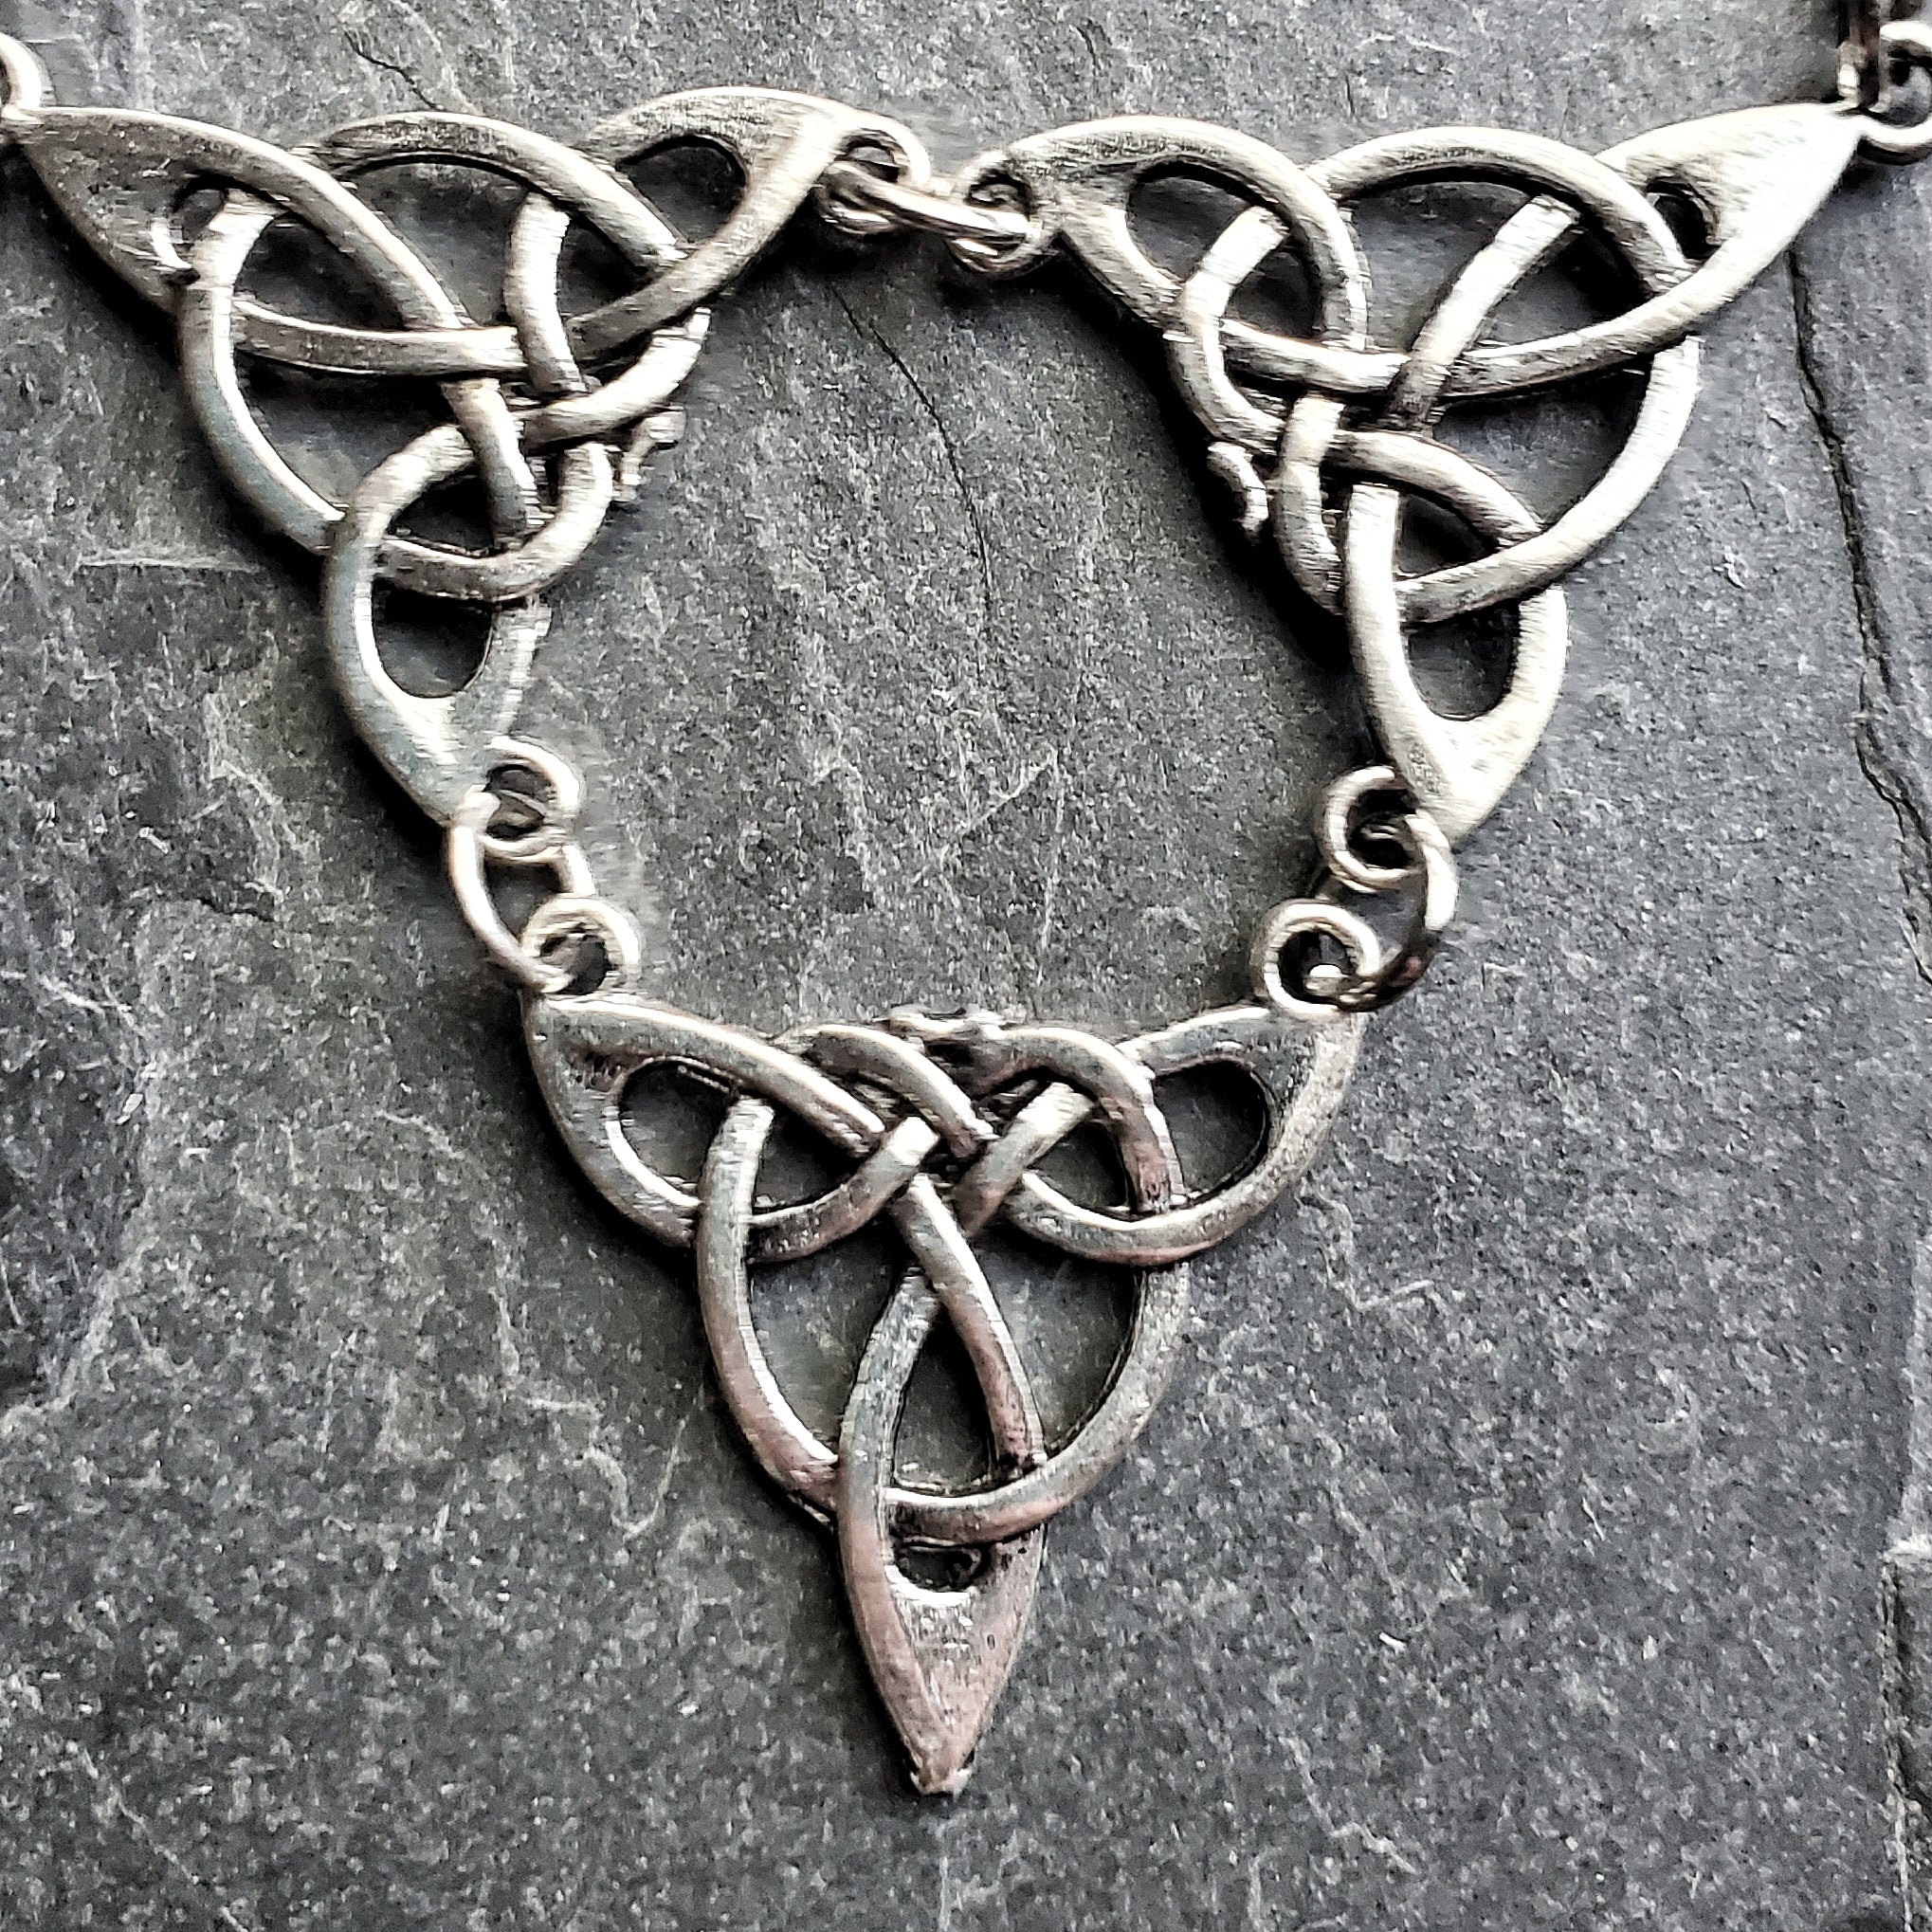 3rd Power Triquetra Necklace Witch Jewelry